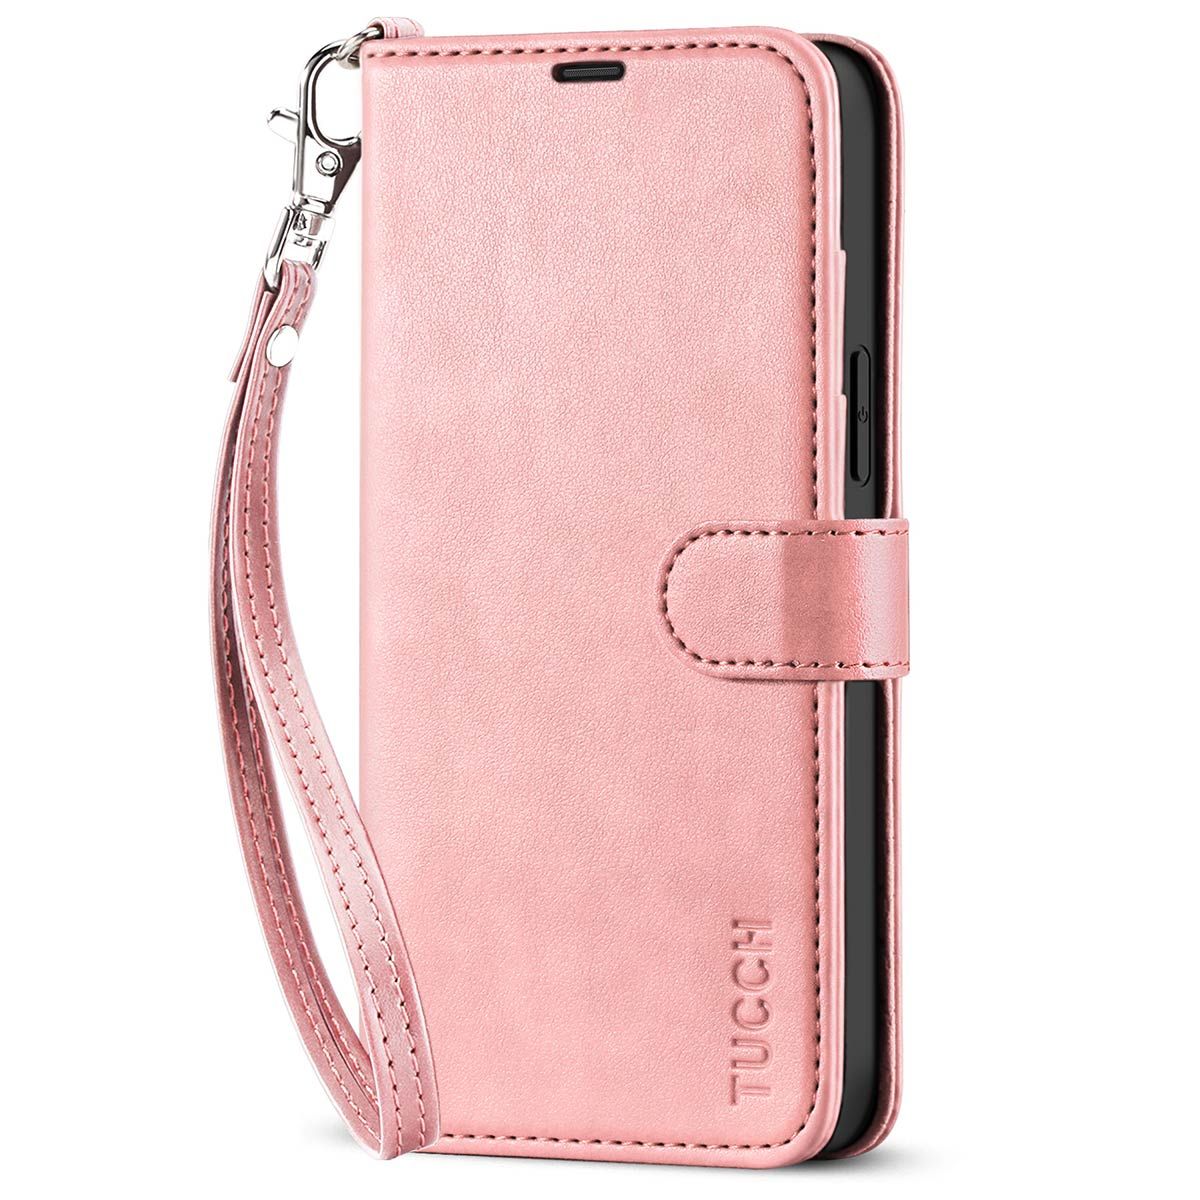 iPhone 13 Pro Max Wallet Case, iPhone 13 Pro Max PU Leather Case